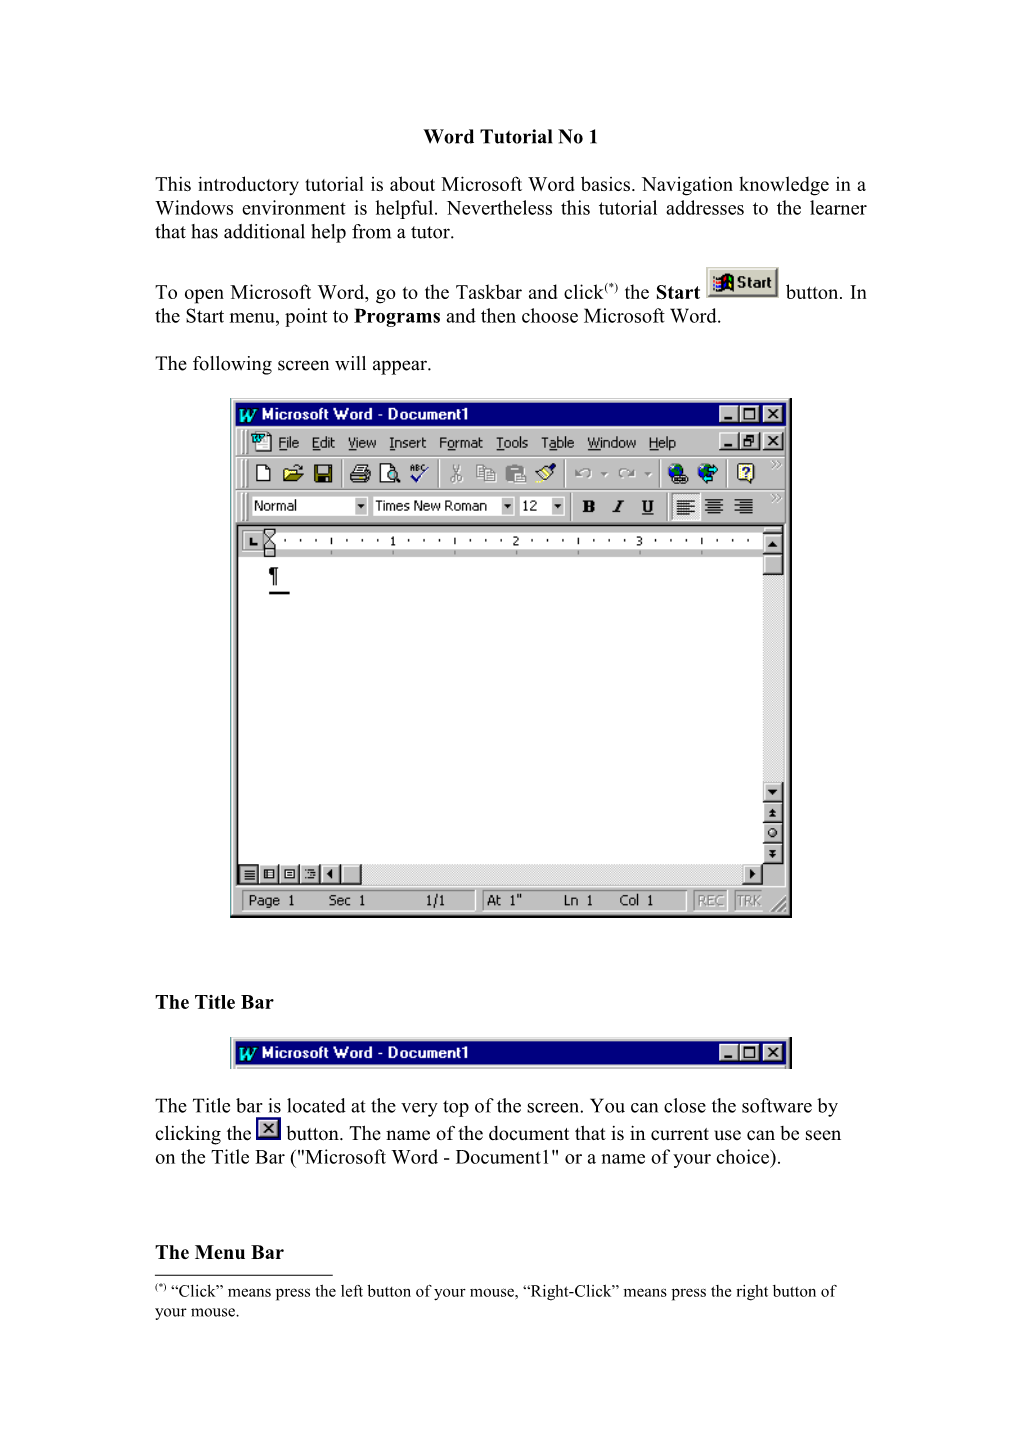 Lesson One: Microsoft Word for Windows